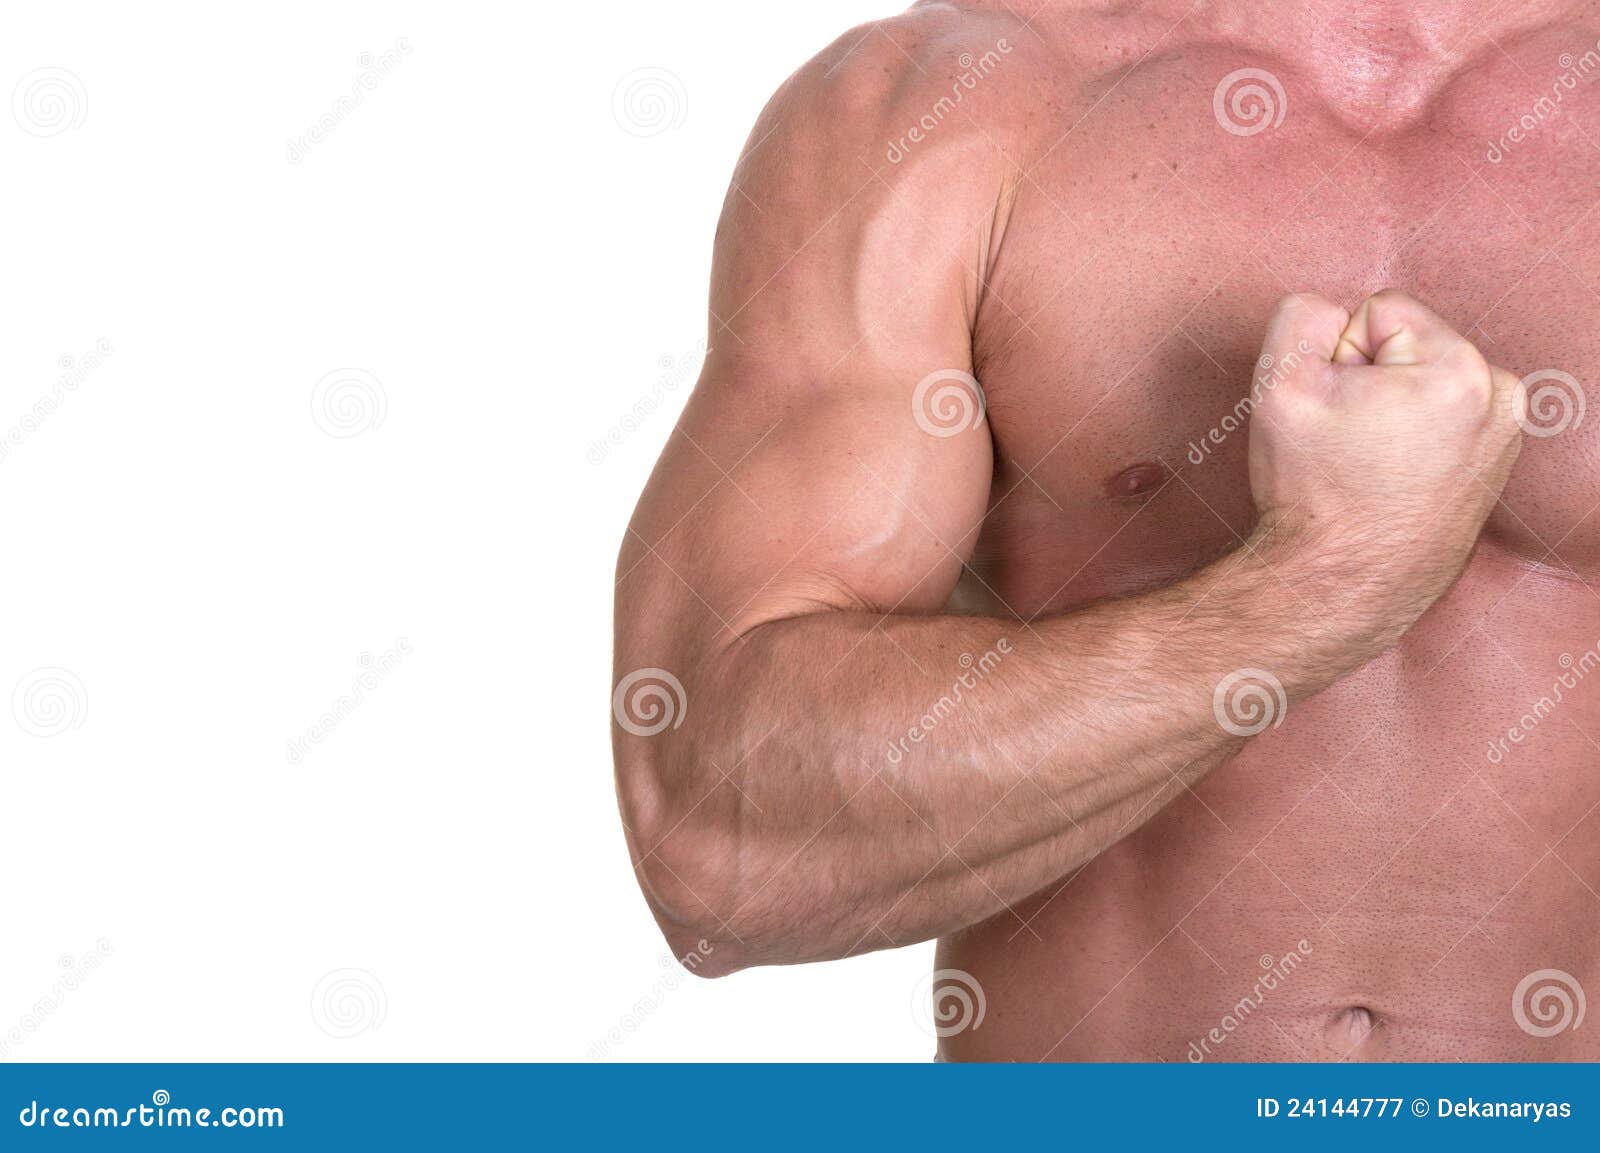 Bodybuilder Torso With Arms Up Ripped Abs And Pecs With Nipple